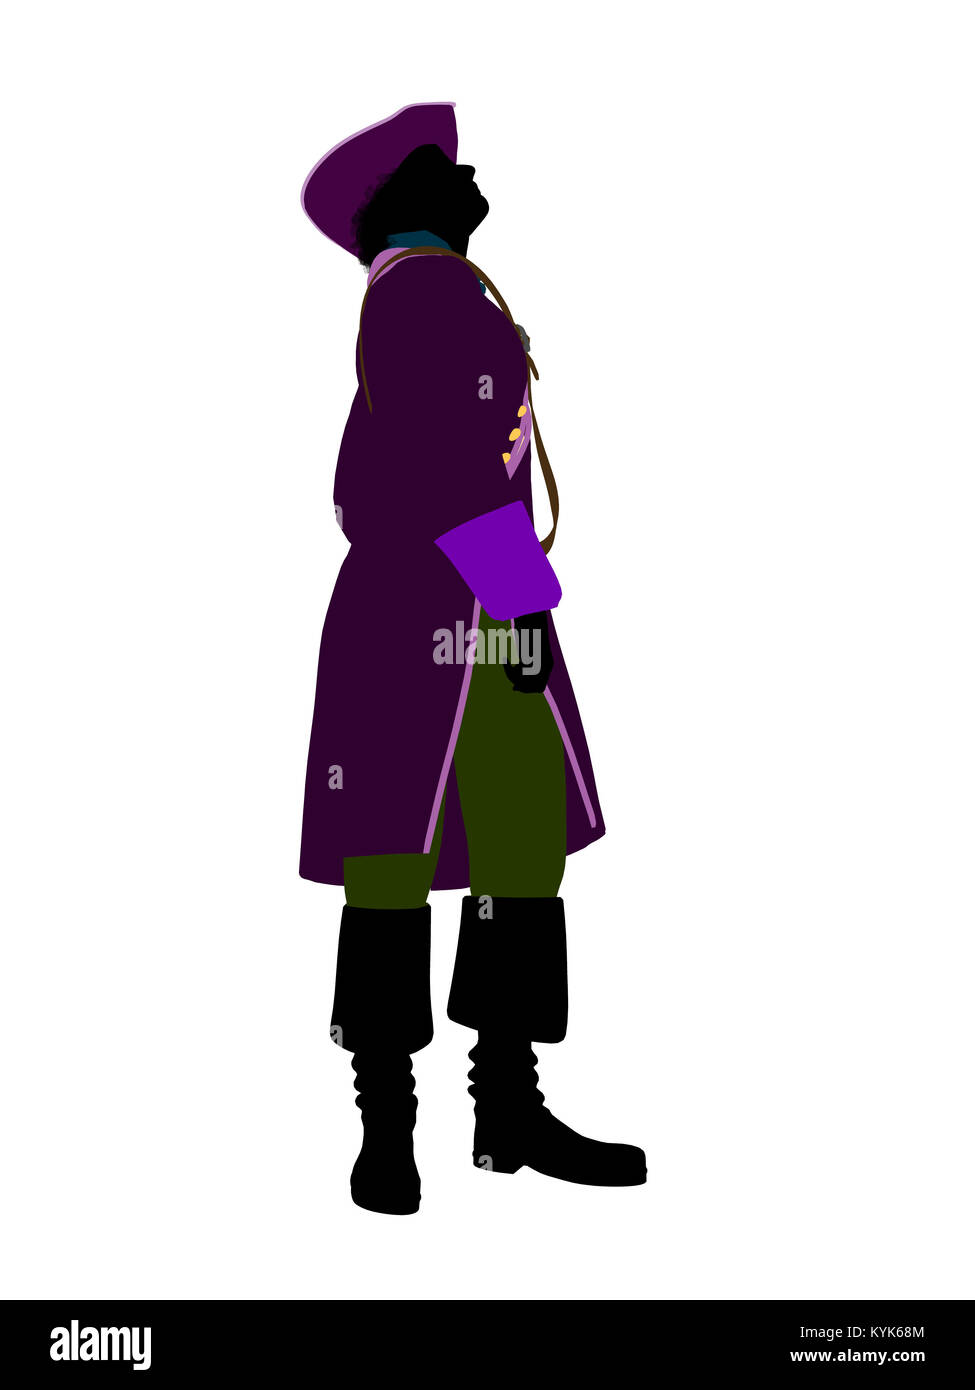 Captain hook illustration silhouette on a white background Stock Photo